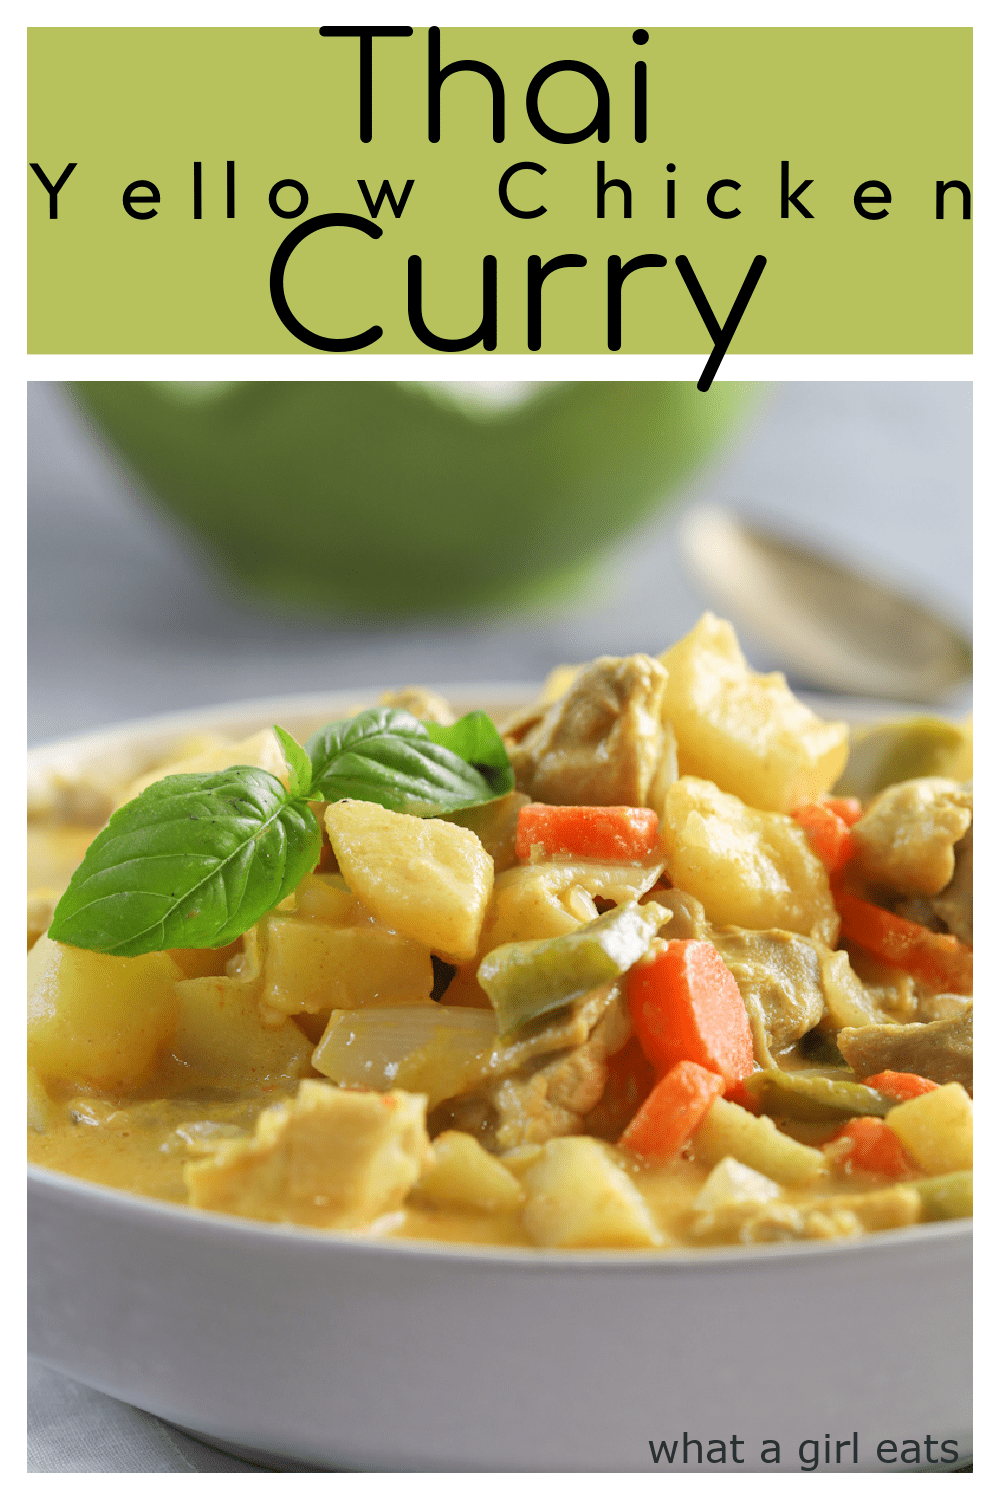 Yellow chicken curry with potatoes, carrots, onions and bell peppers in a rich creamy coconut sauce. Perfect with jasmine rice.